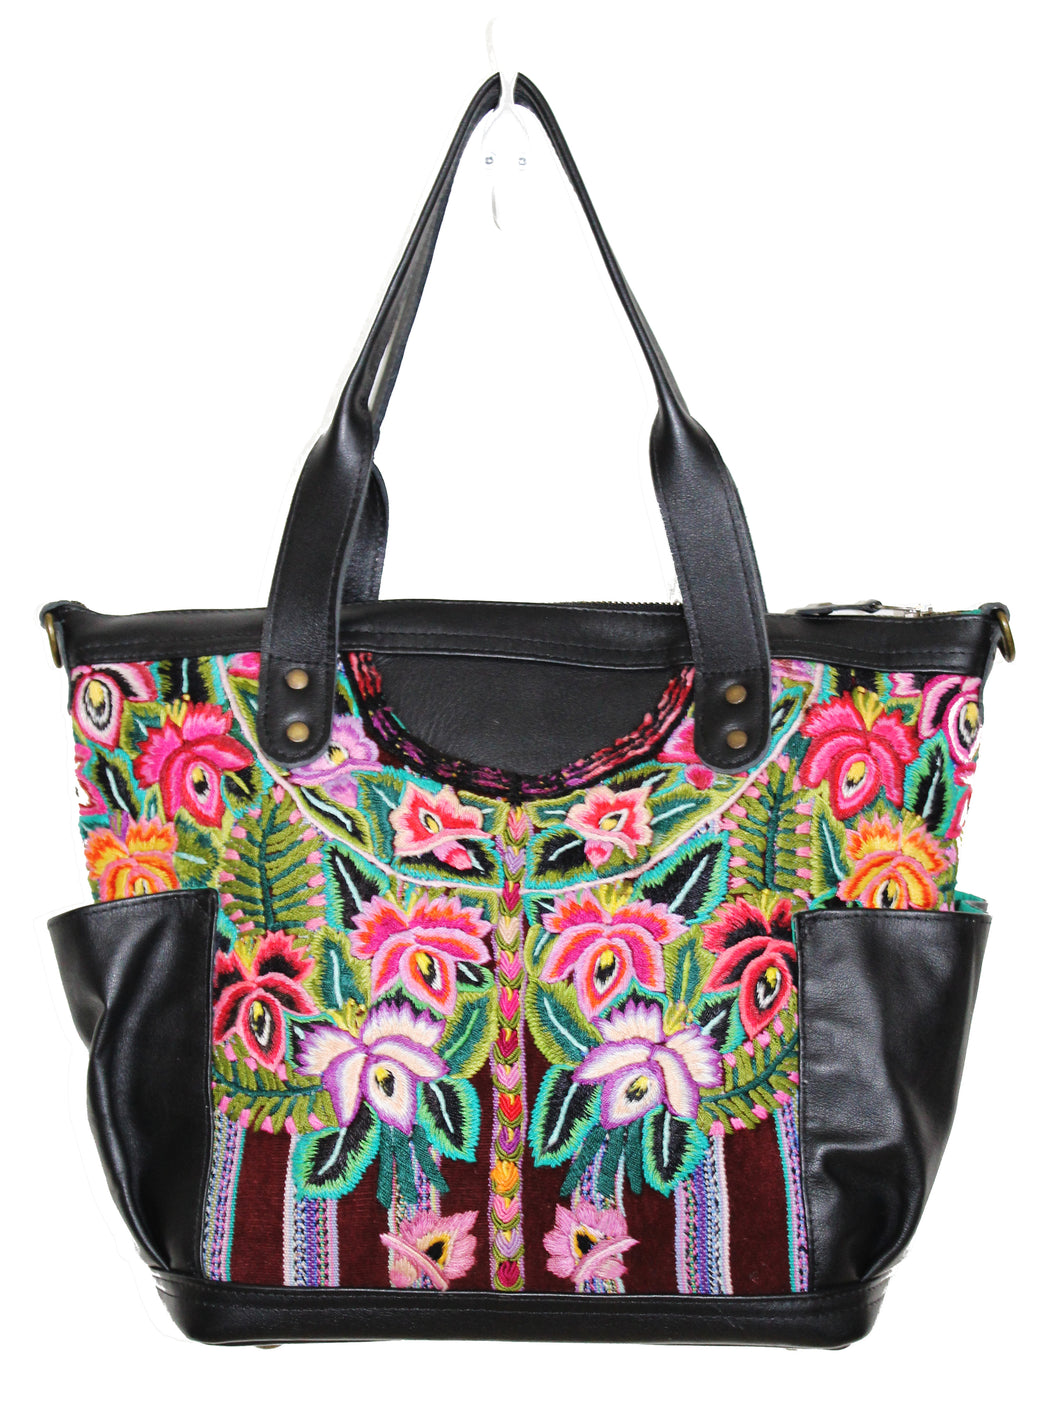 MoonLake Designs Elena medium convertible day bag in handcrafted black leather with handwoven floral huipil design in pinks, purples, oranges, and green